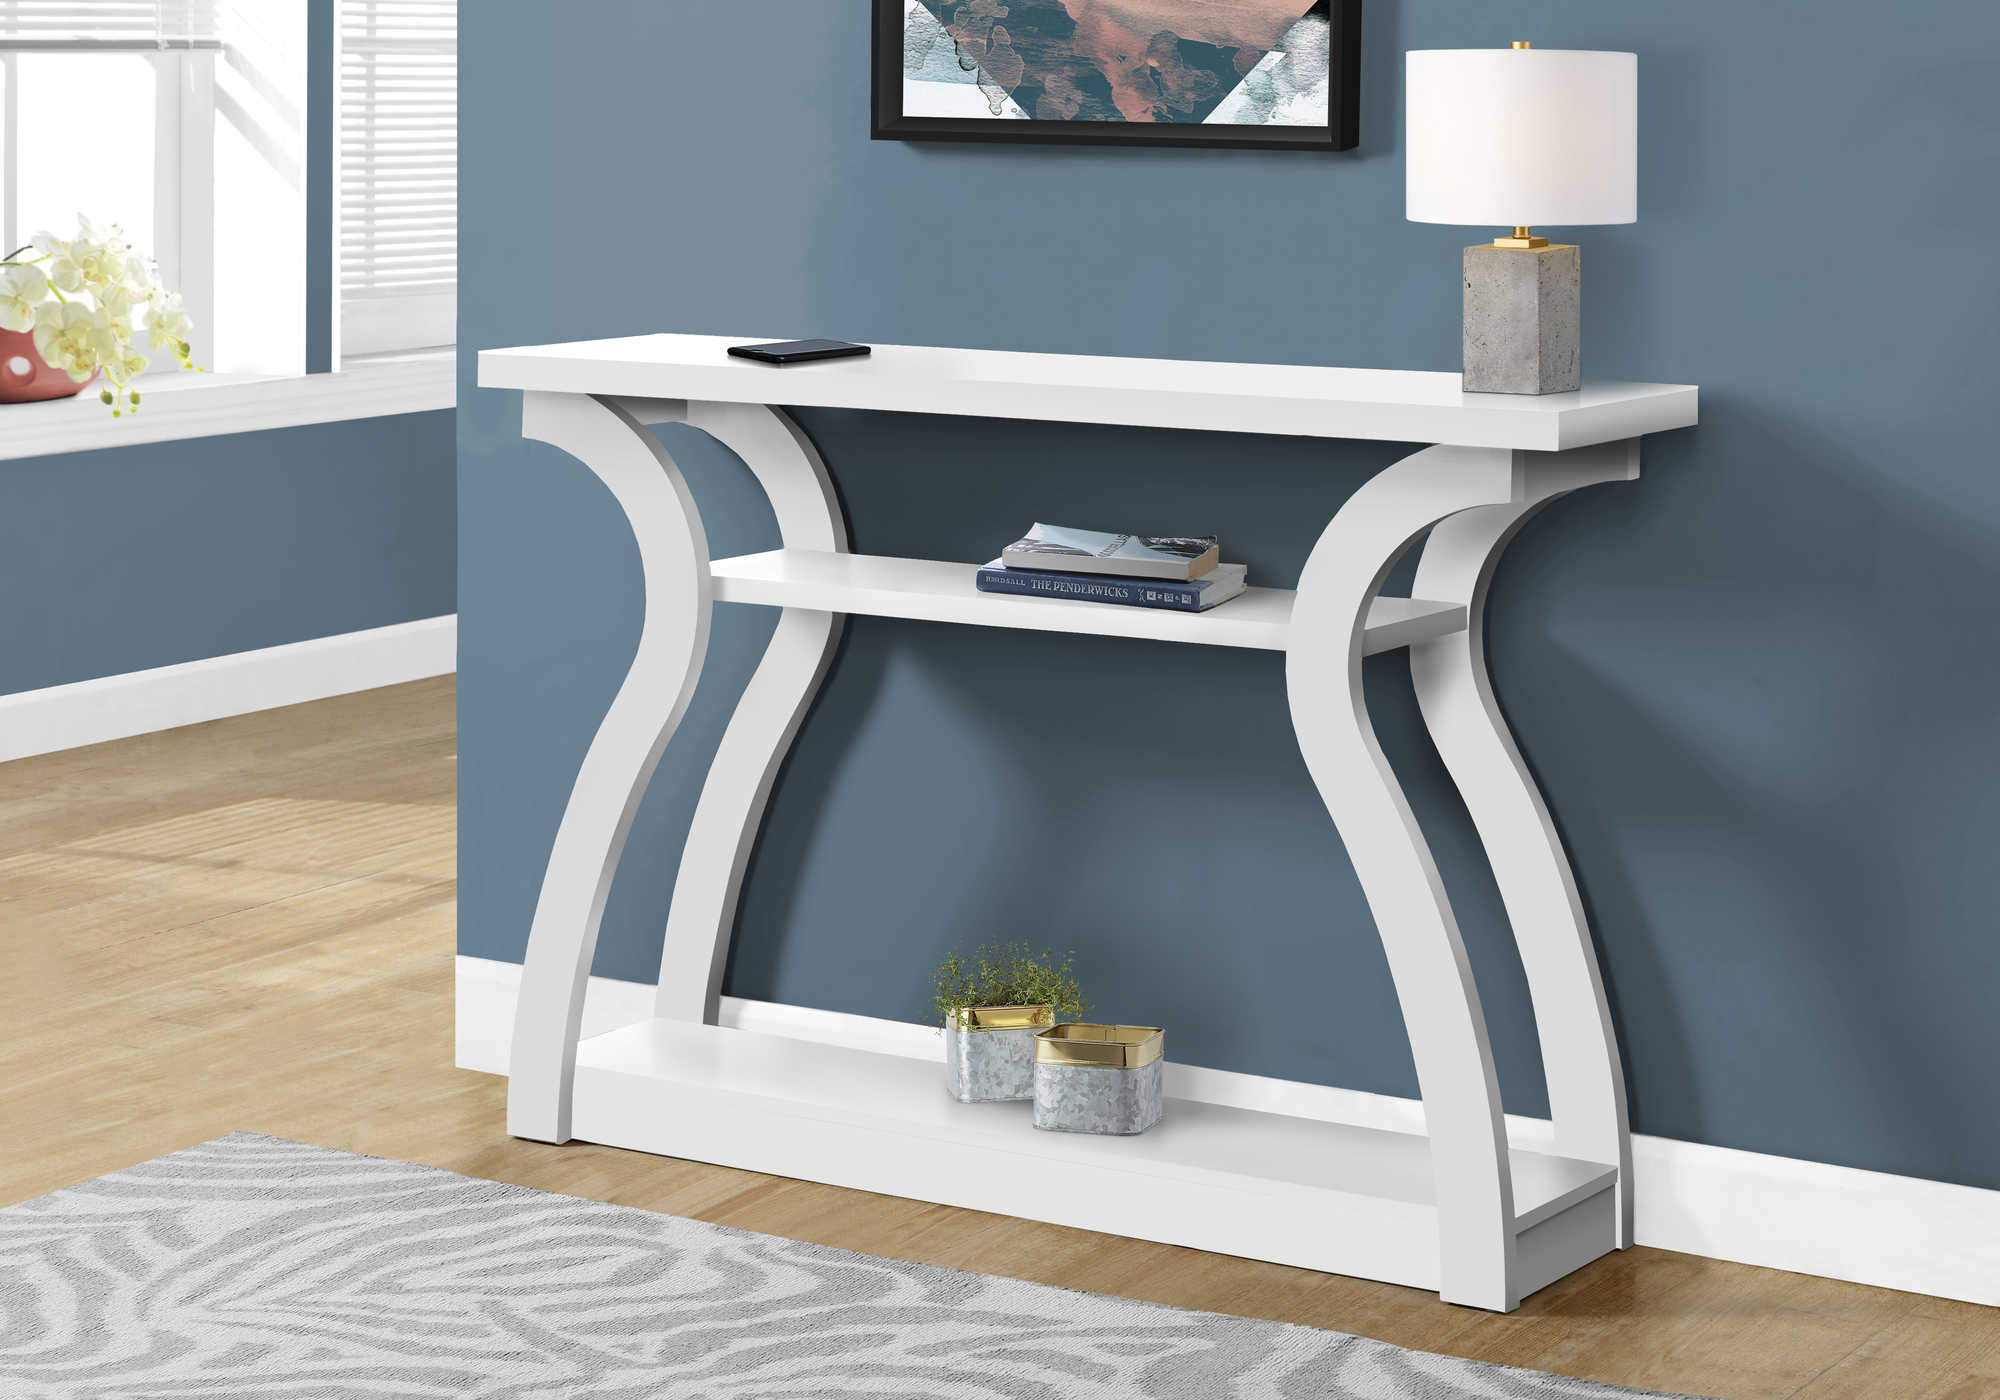 ACCENT TABLE - 47"L / WHITE HALL CONSOLE